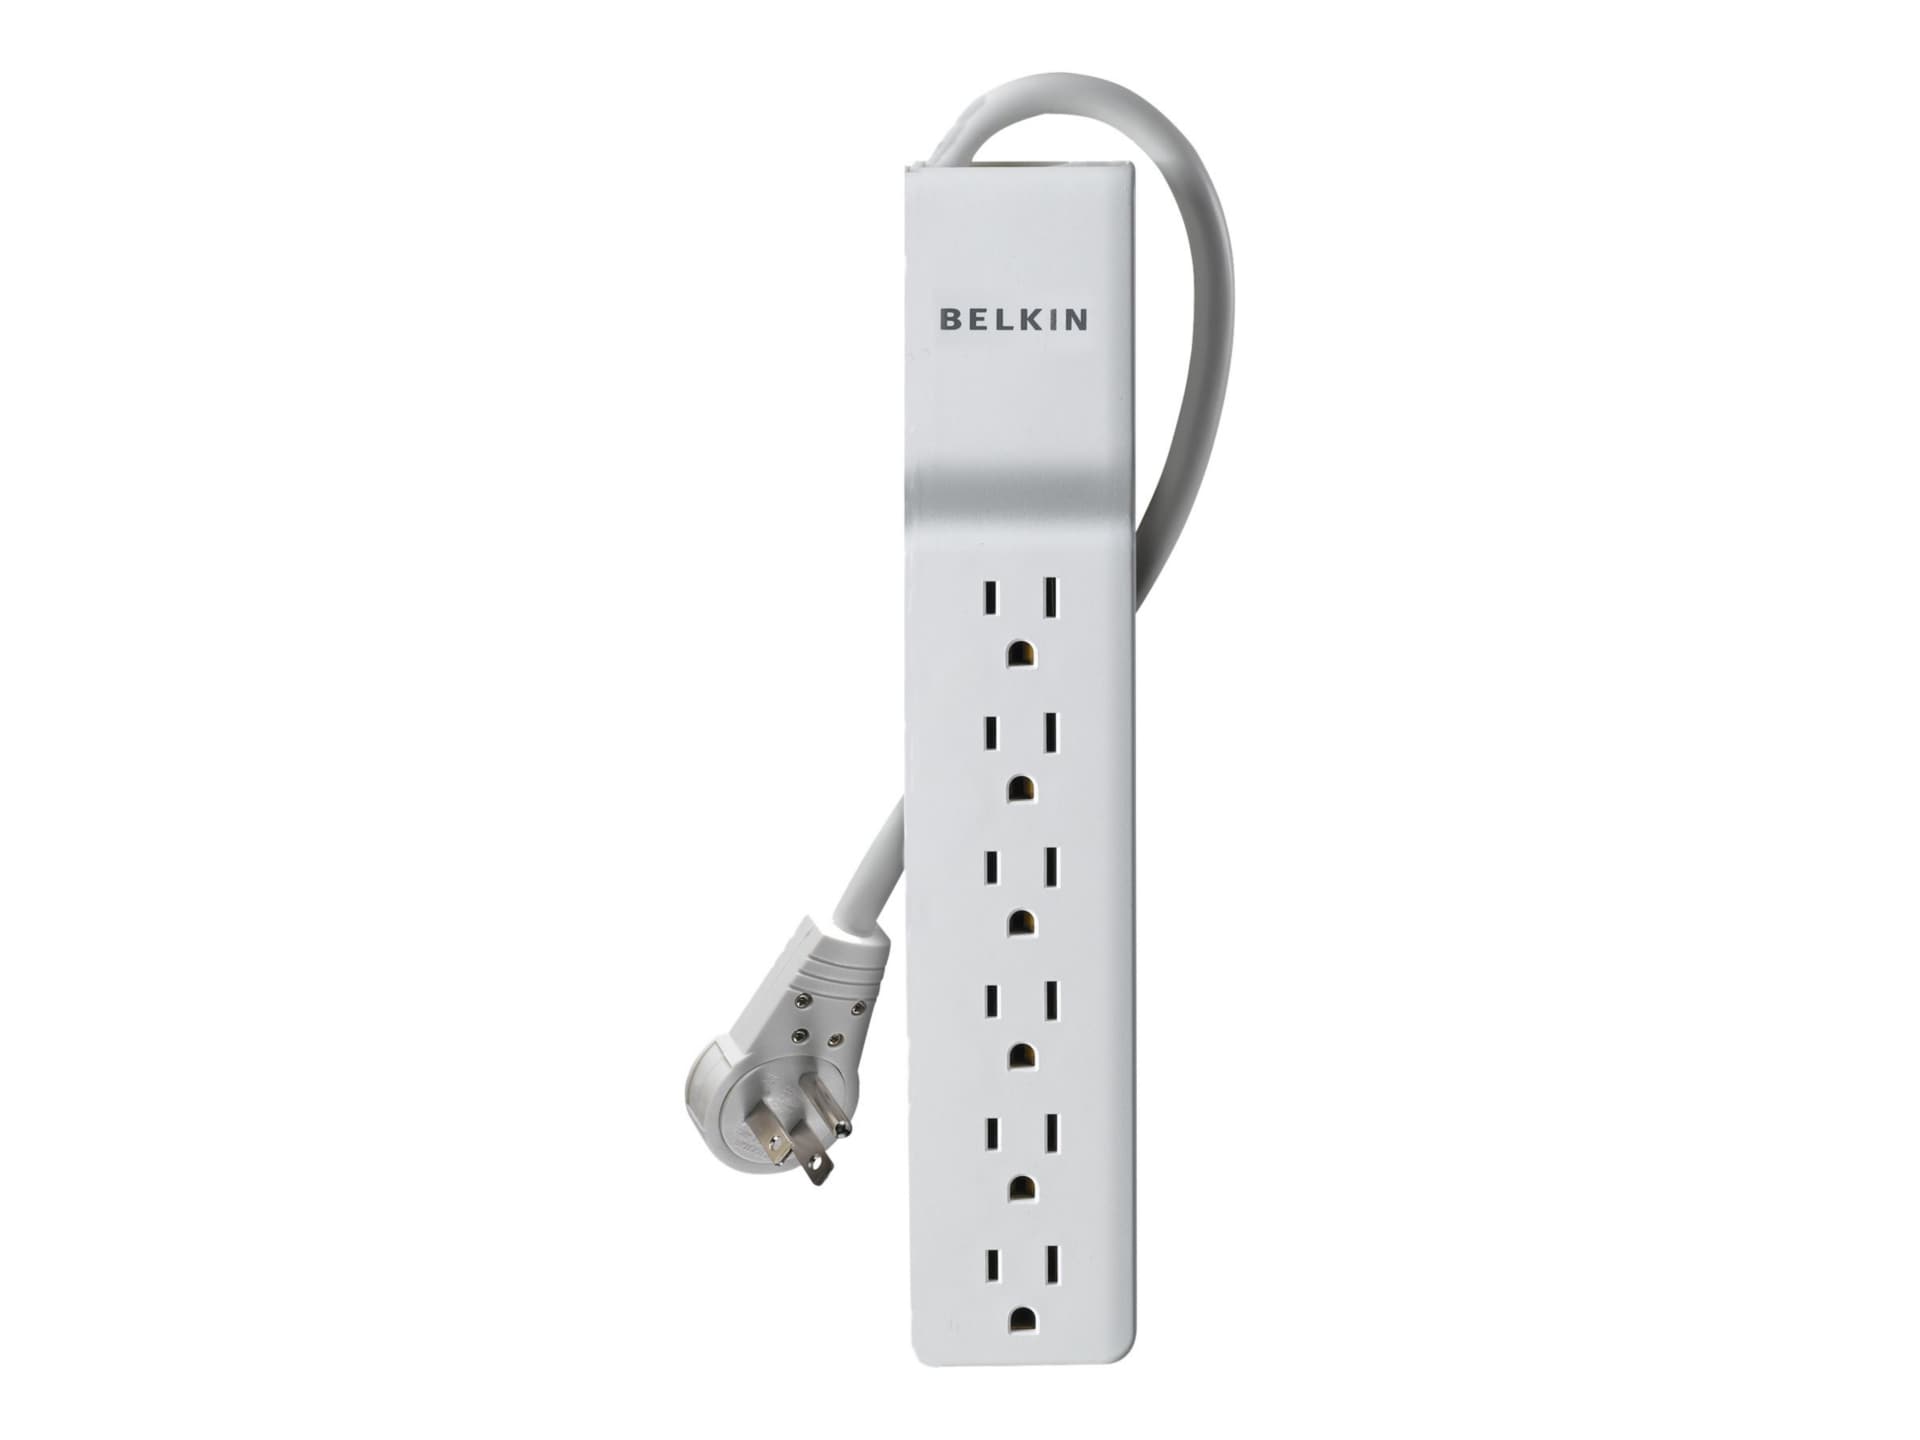 Belkin 6 Outlet Power Strip Surge Protector with 6ft Power Cord - 700 Joules - White